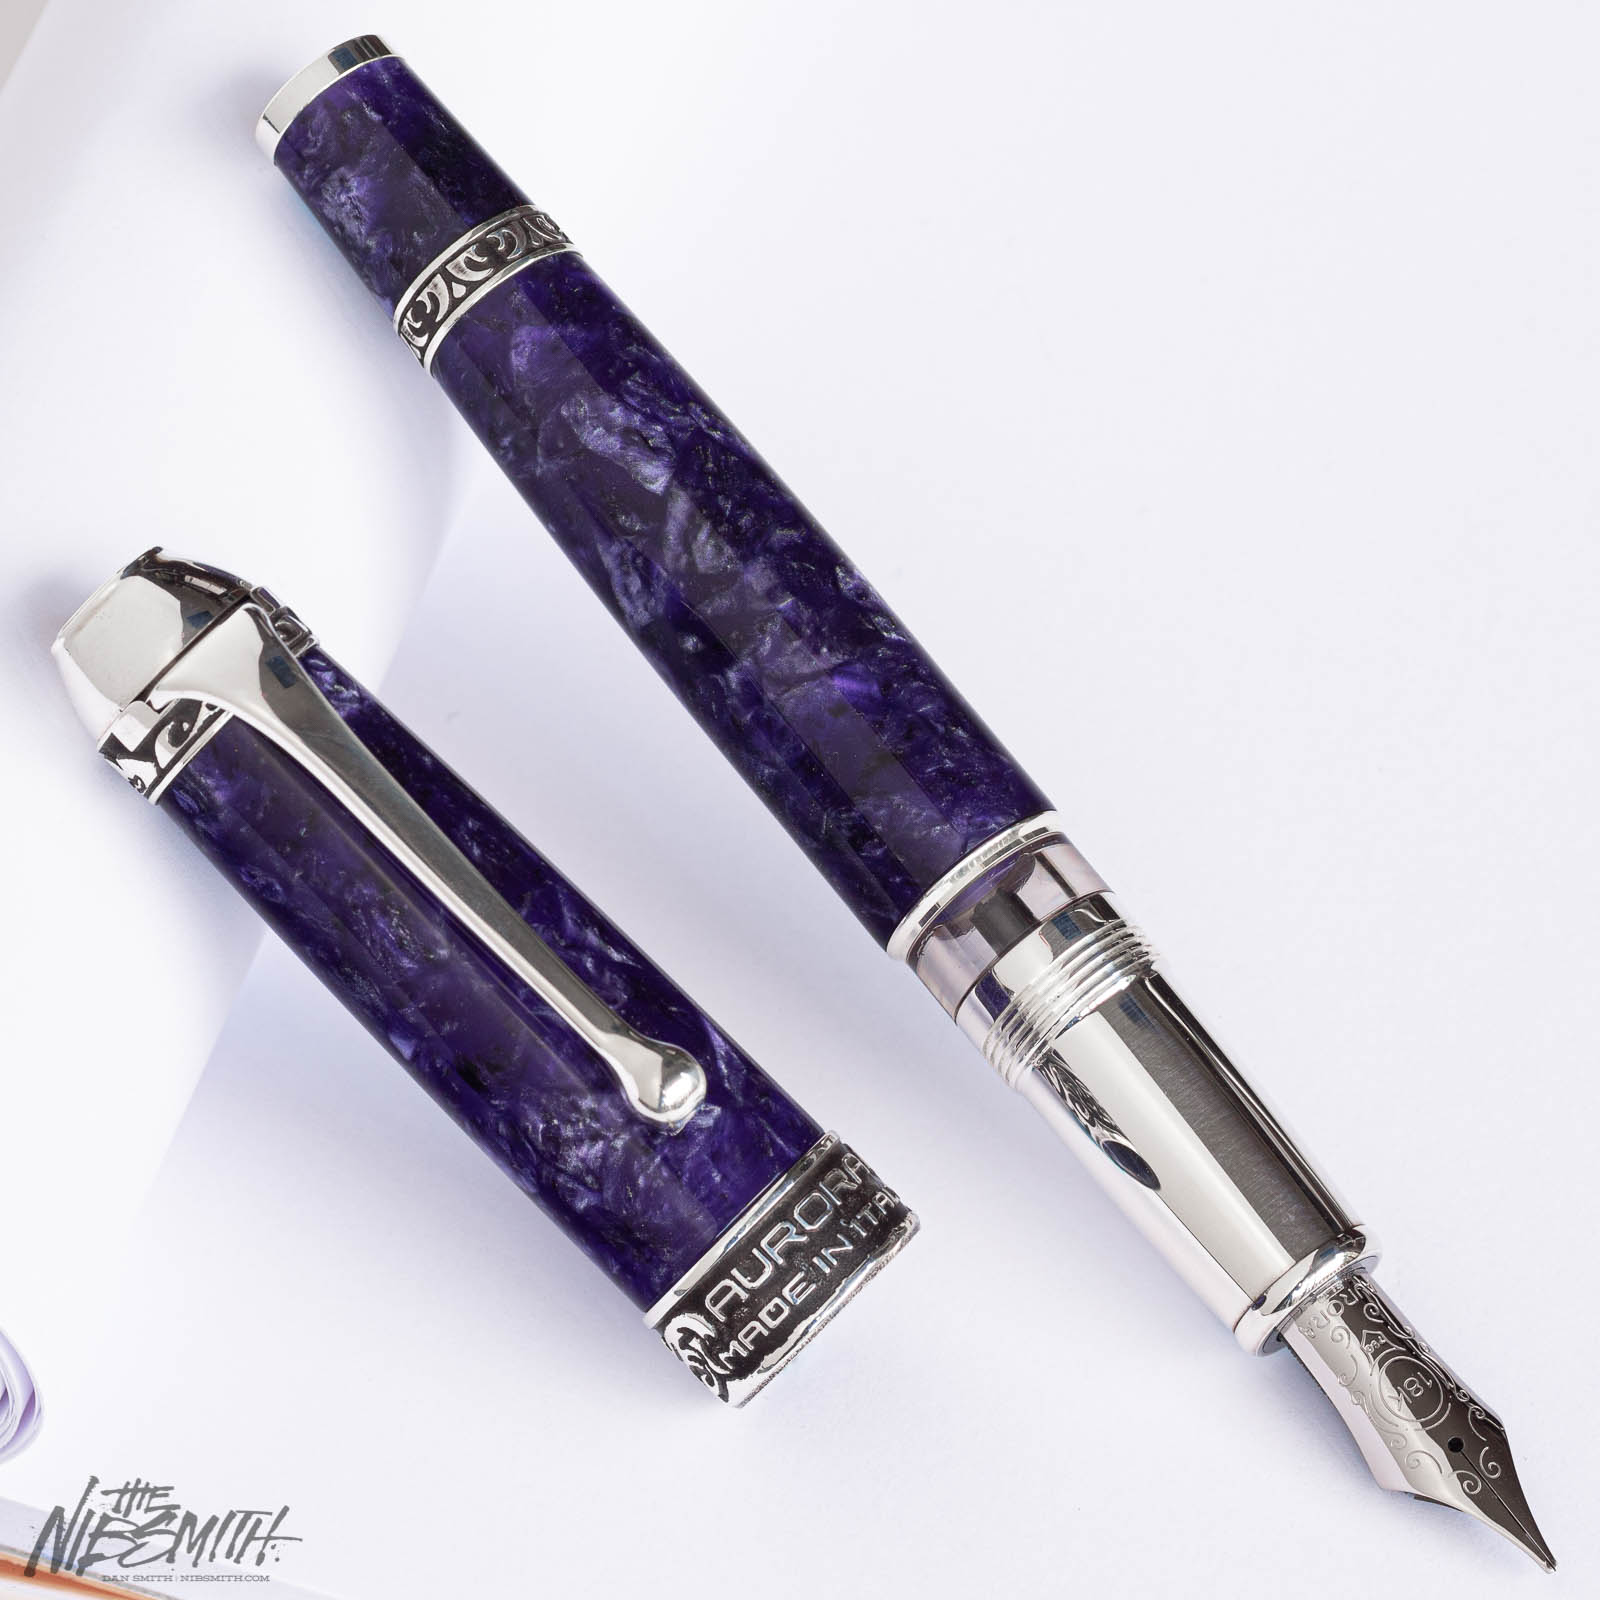 Indiano Limited Edition Fountain Pen The Nibsmith